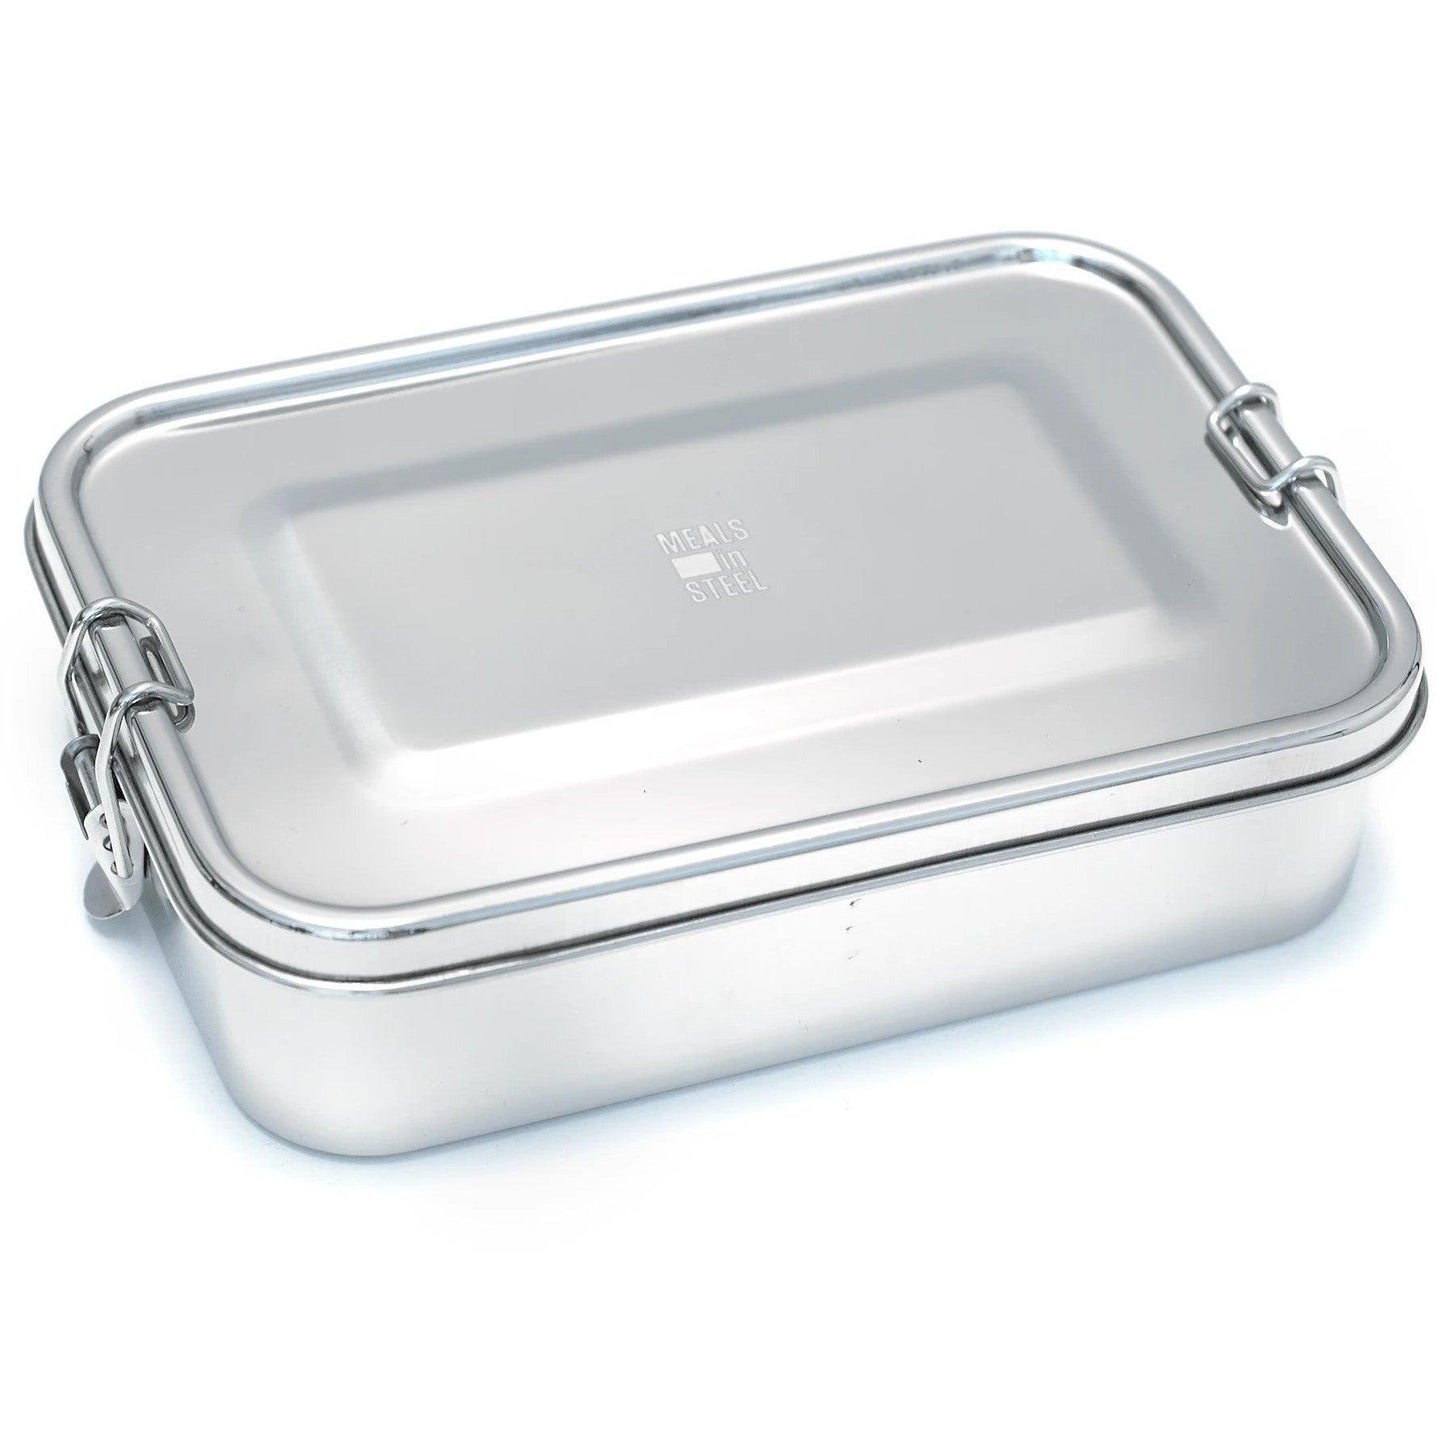 leakproof-bento-box-or-fixed-partitions-or-stainless-steel-meals-in-steel-3